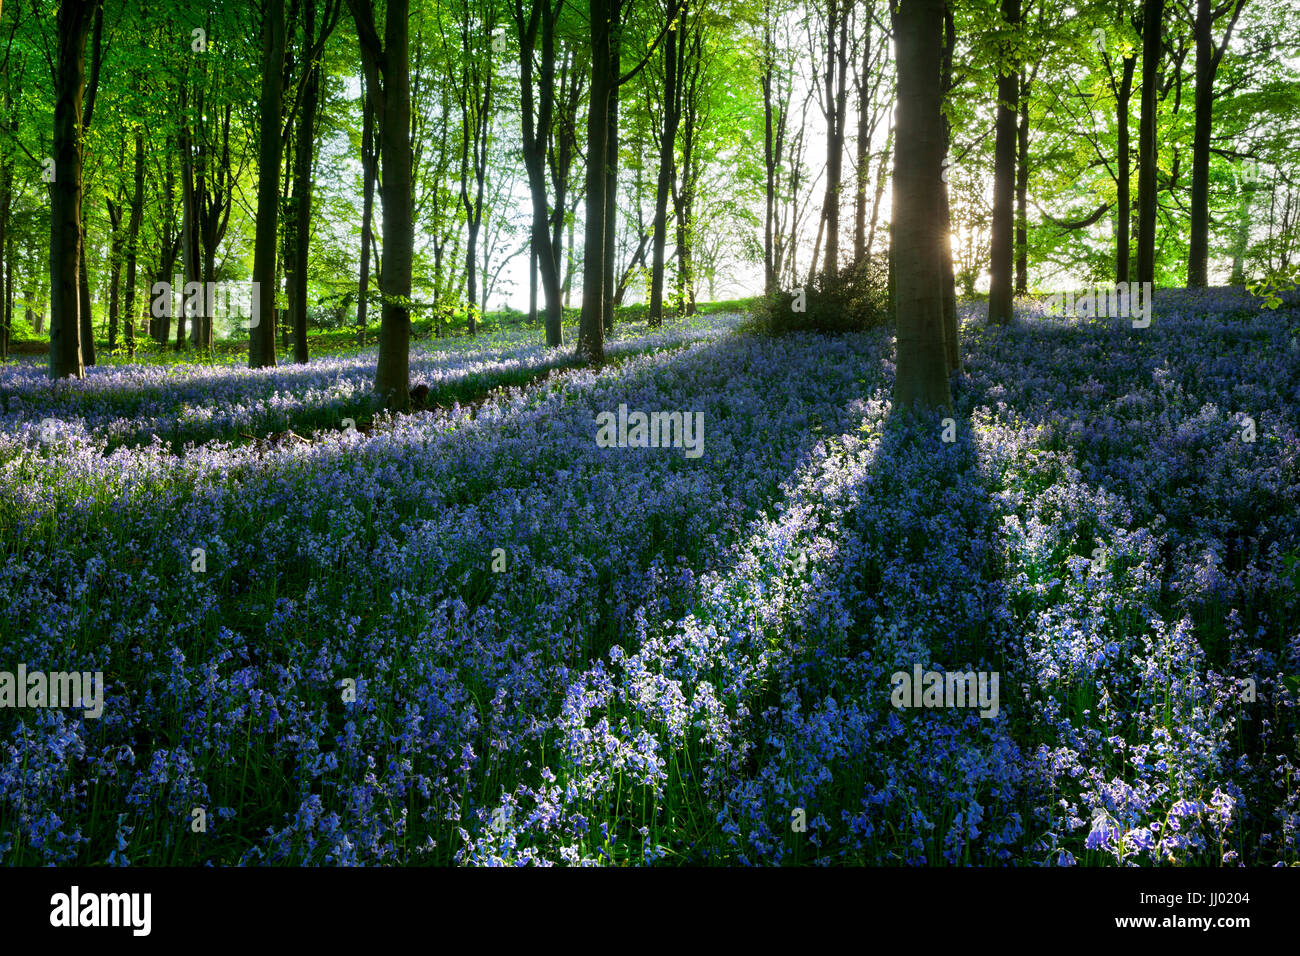 Bluebell wood, Chipping Campden, Cotswolds, Gloucestershire, England, United Kingdom, Europe Stock Photo